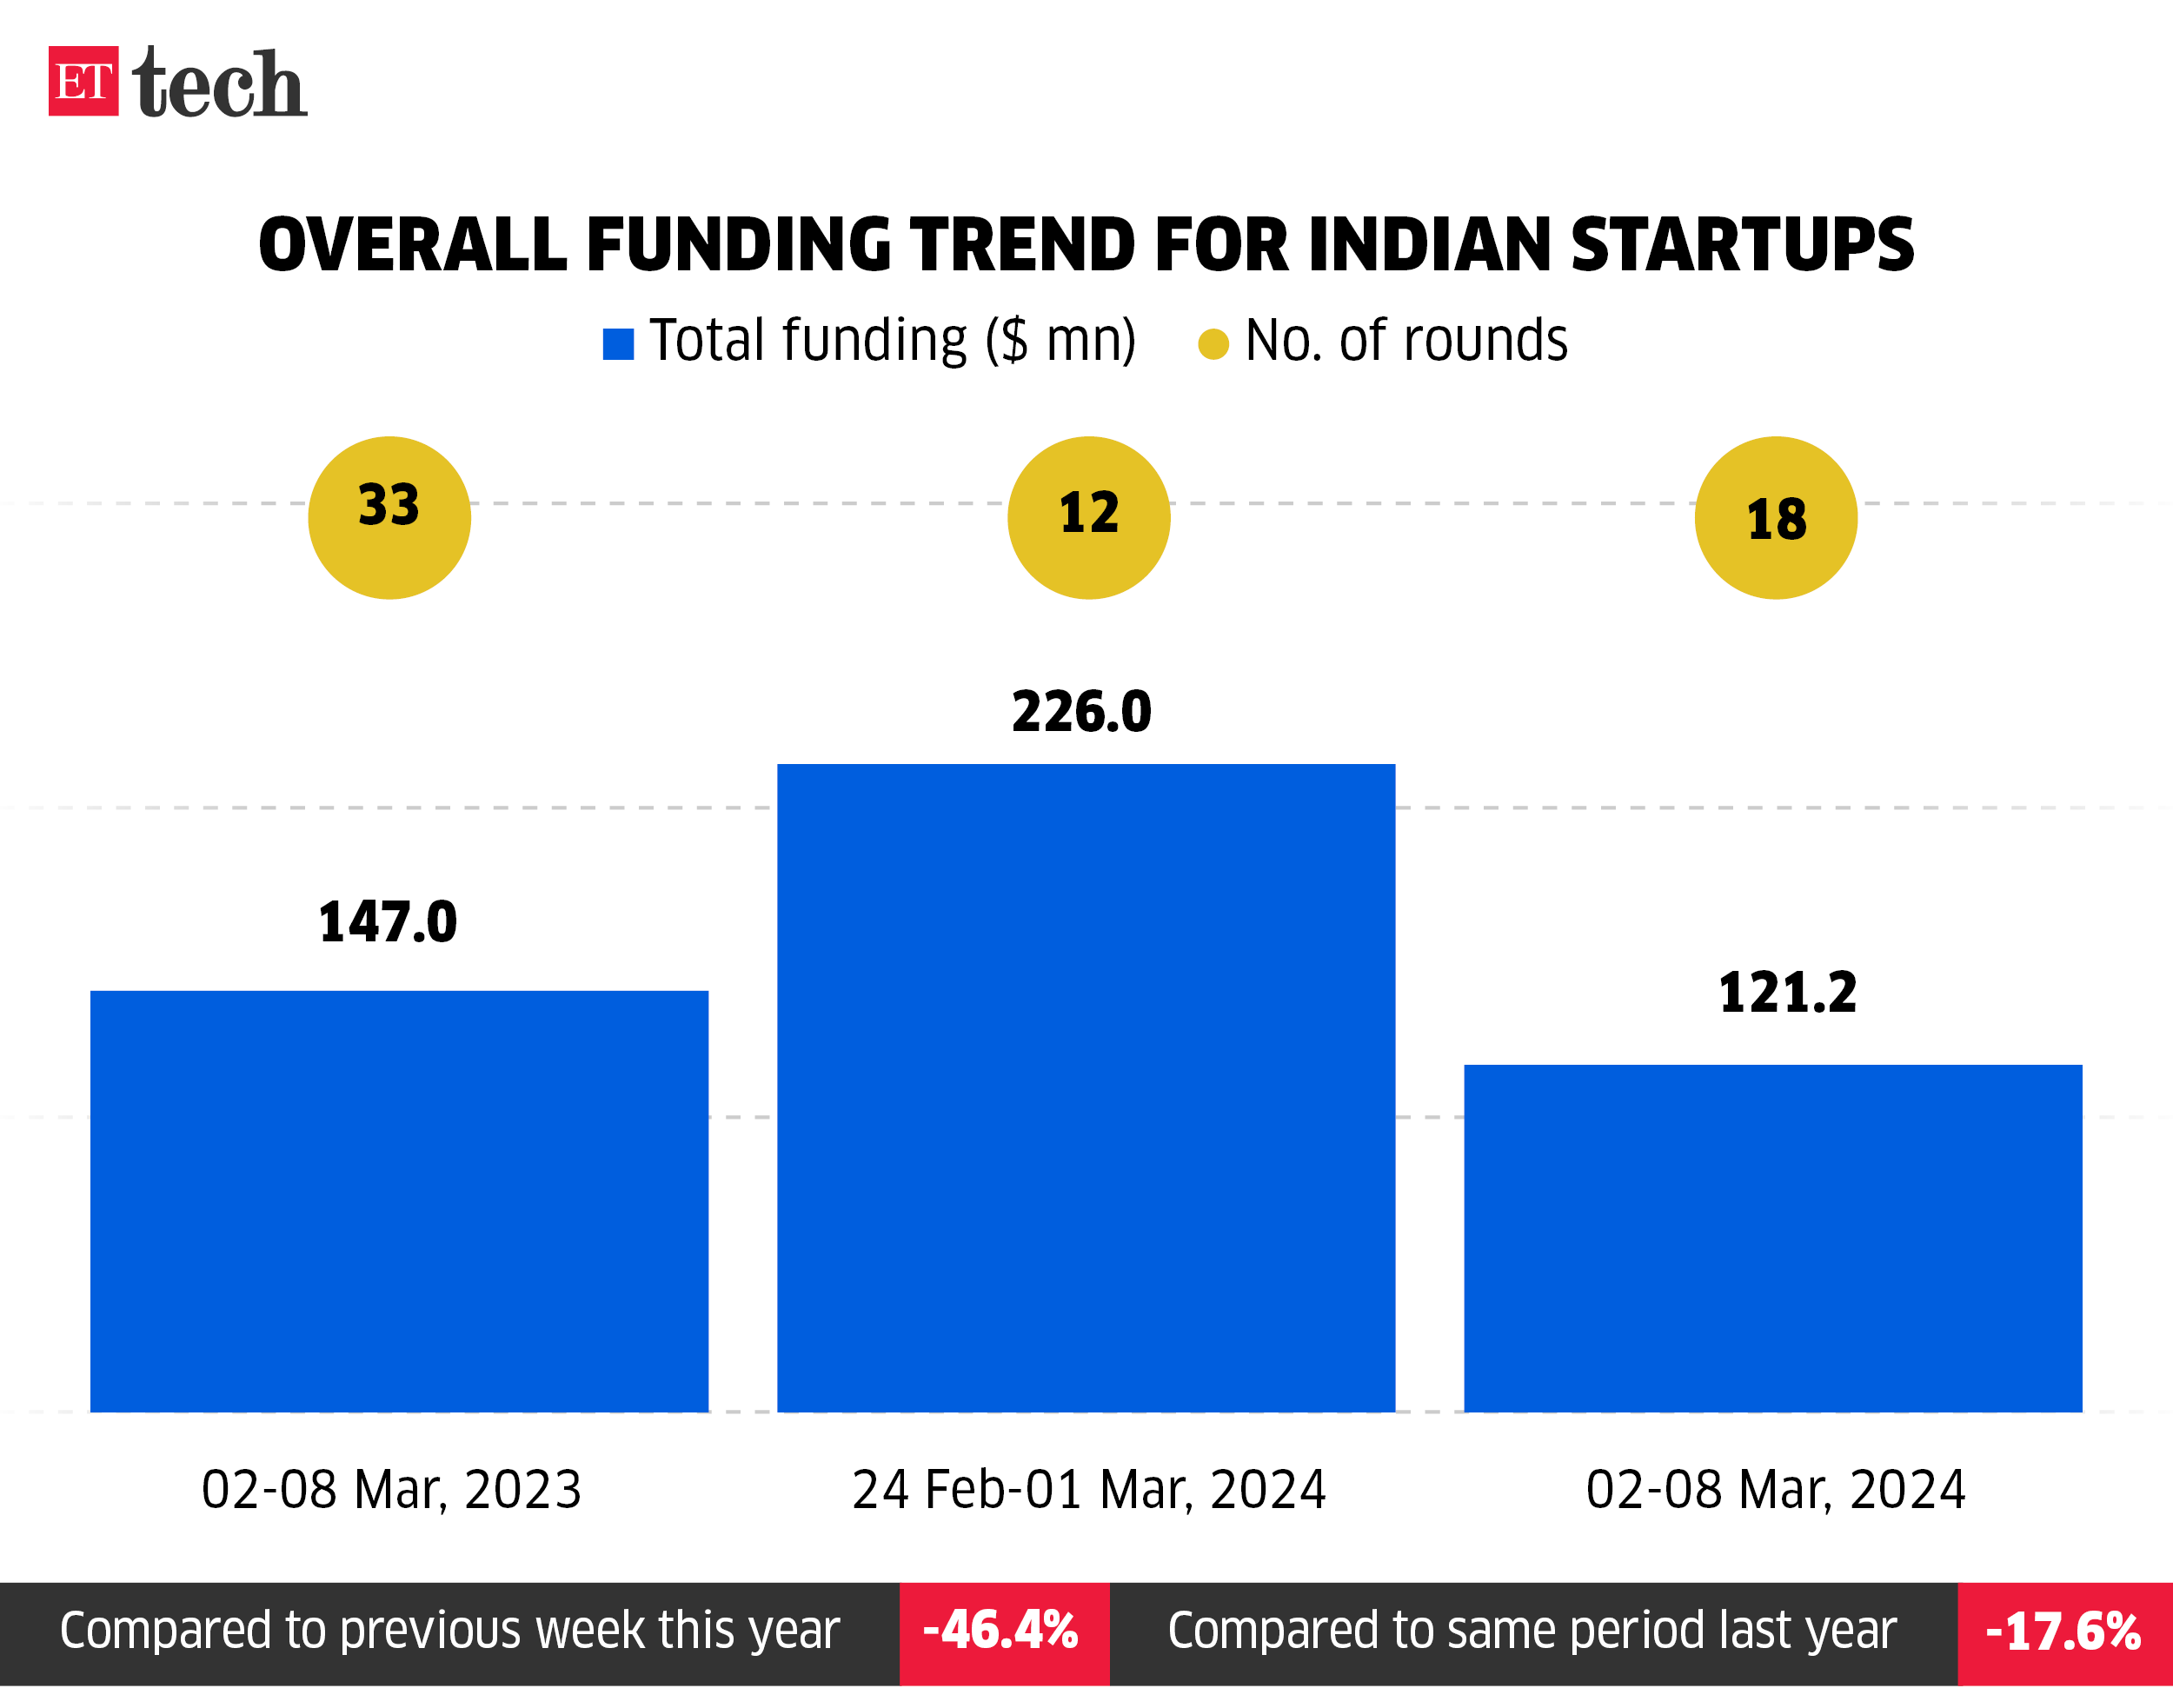 Overall funding